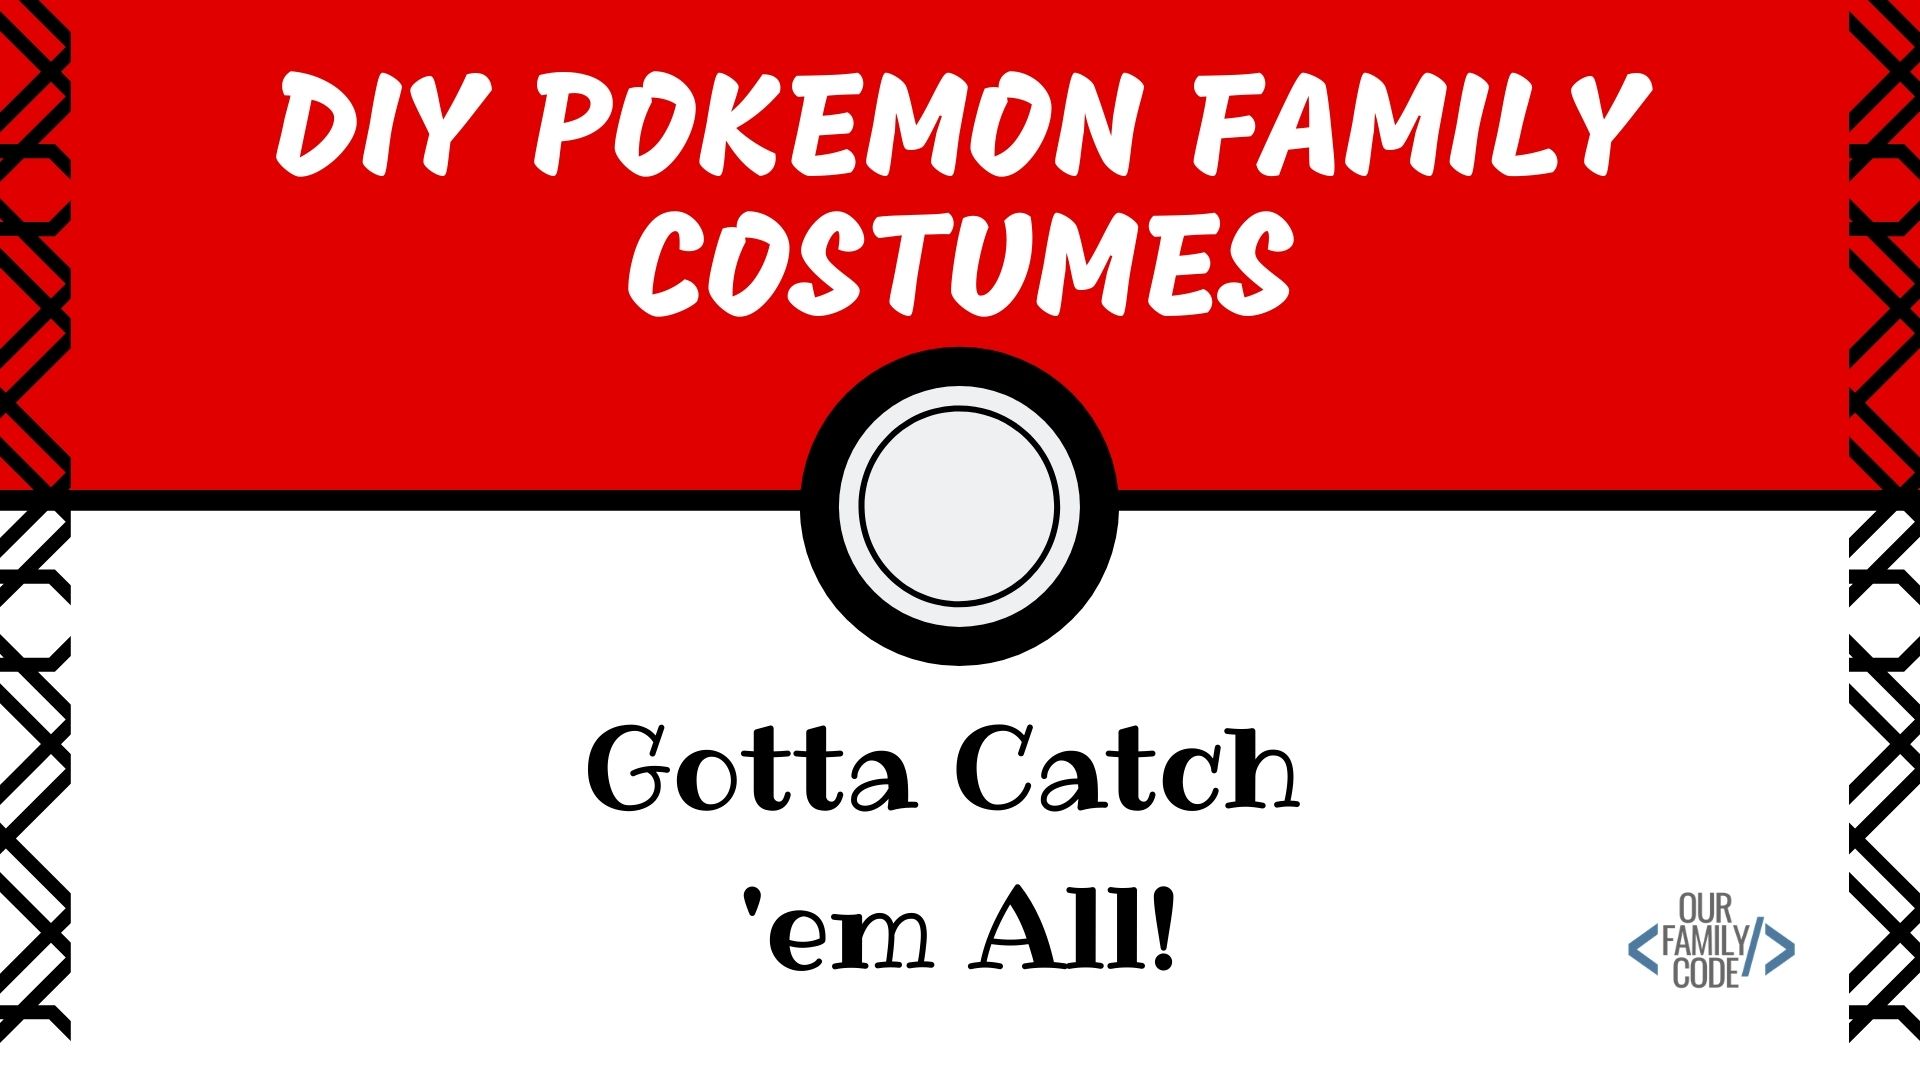 A red and white background with text "DIY Pokemon family costumes" in white text".